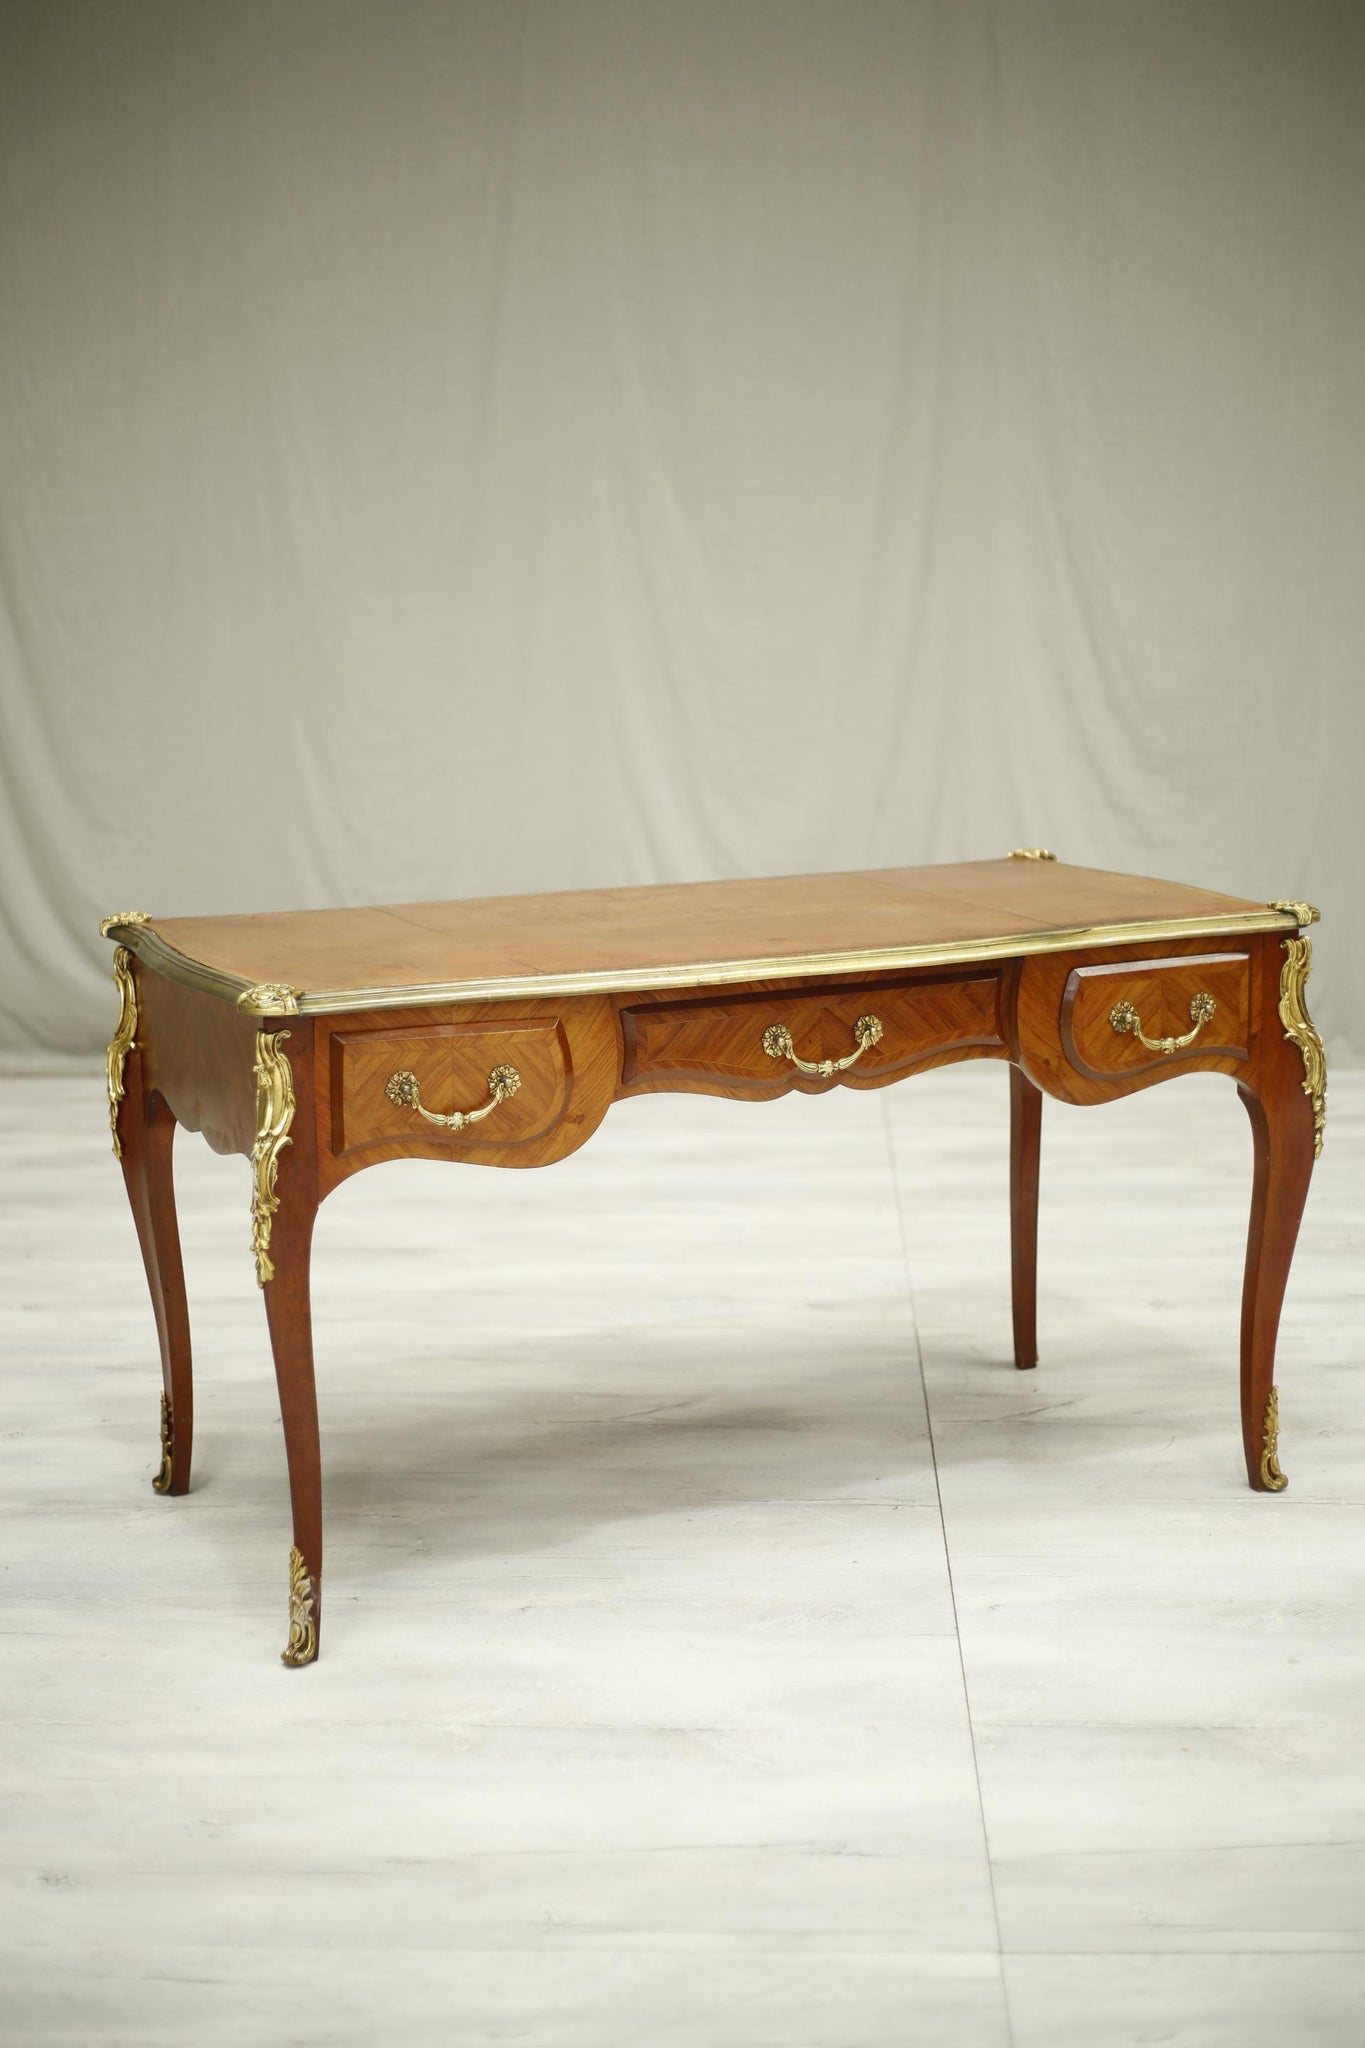 Antique 19th century French empire mahogany and leather desk